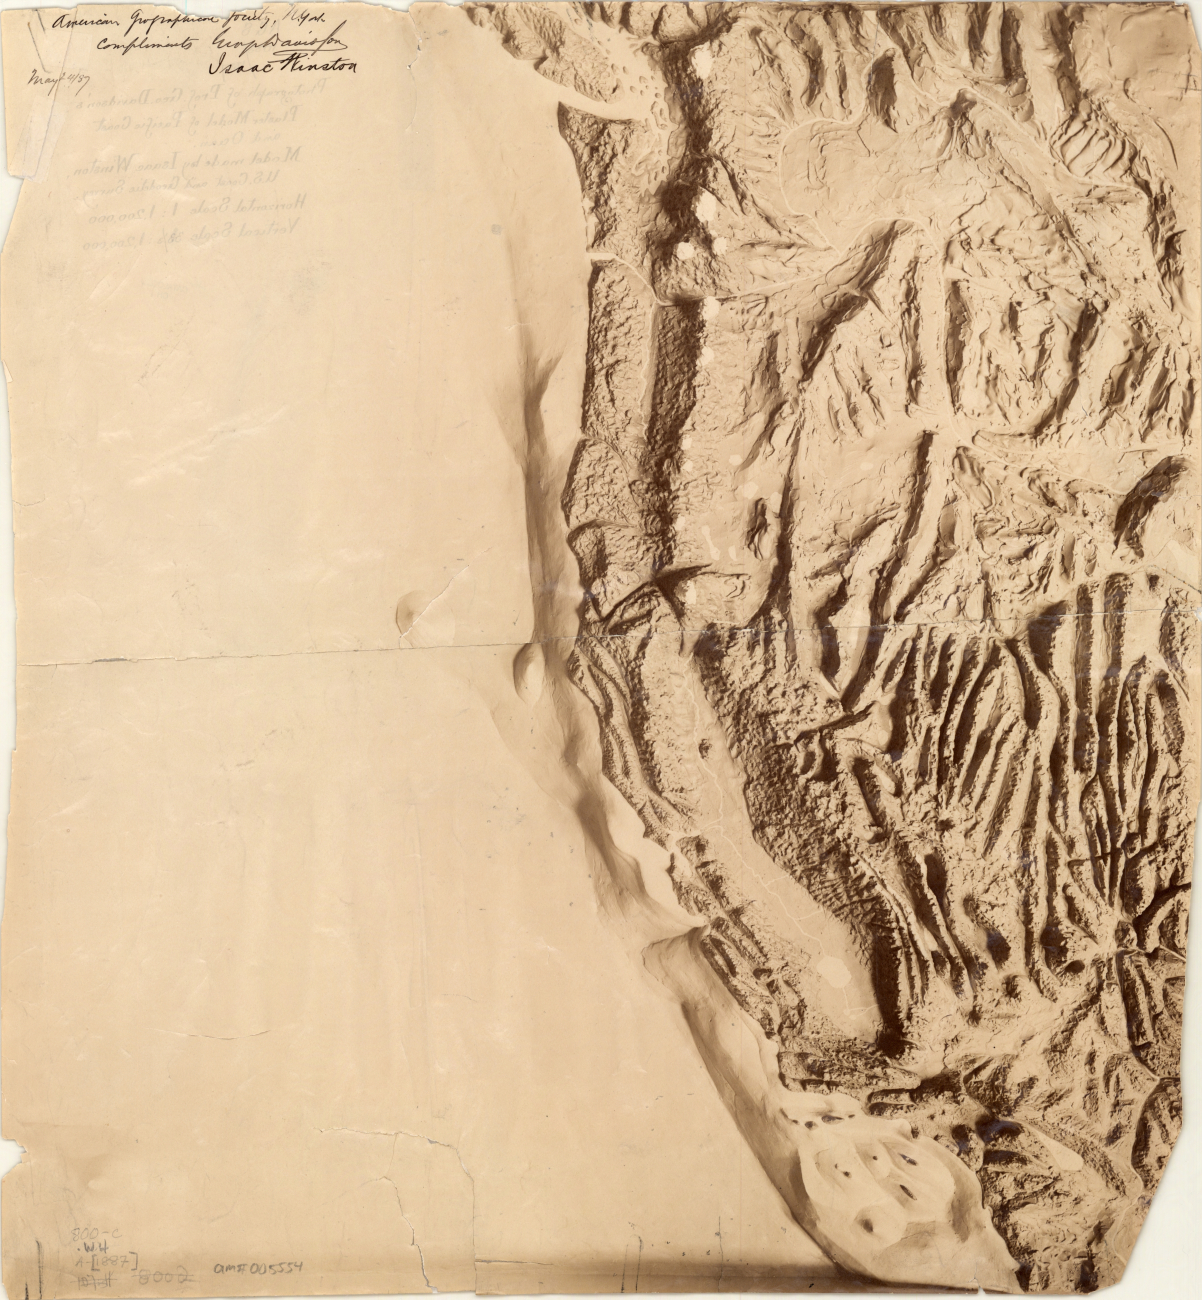 George Davidson' 3d view of the western United States and the continental shelfand slope